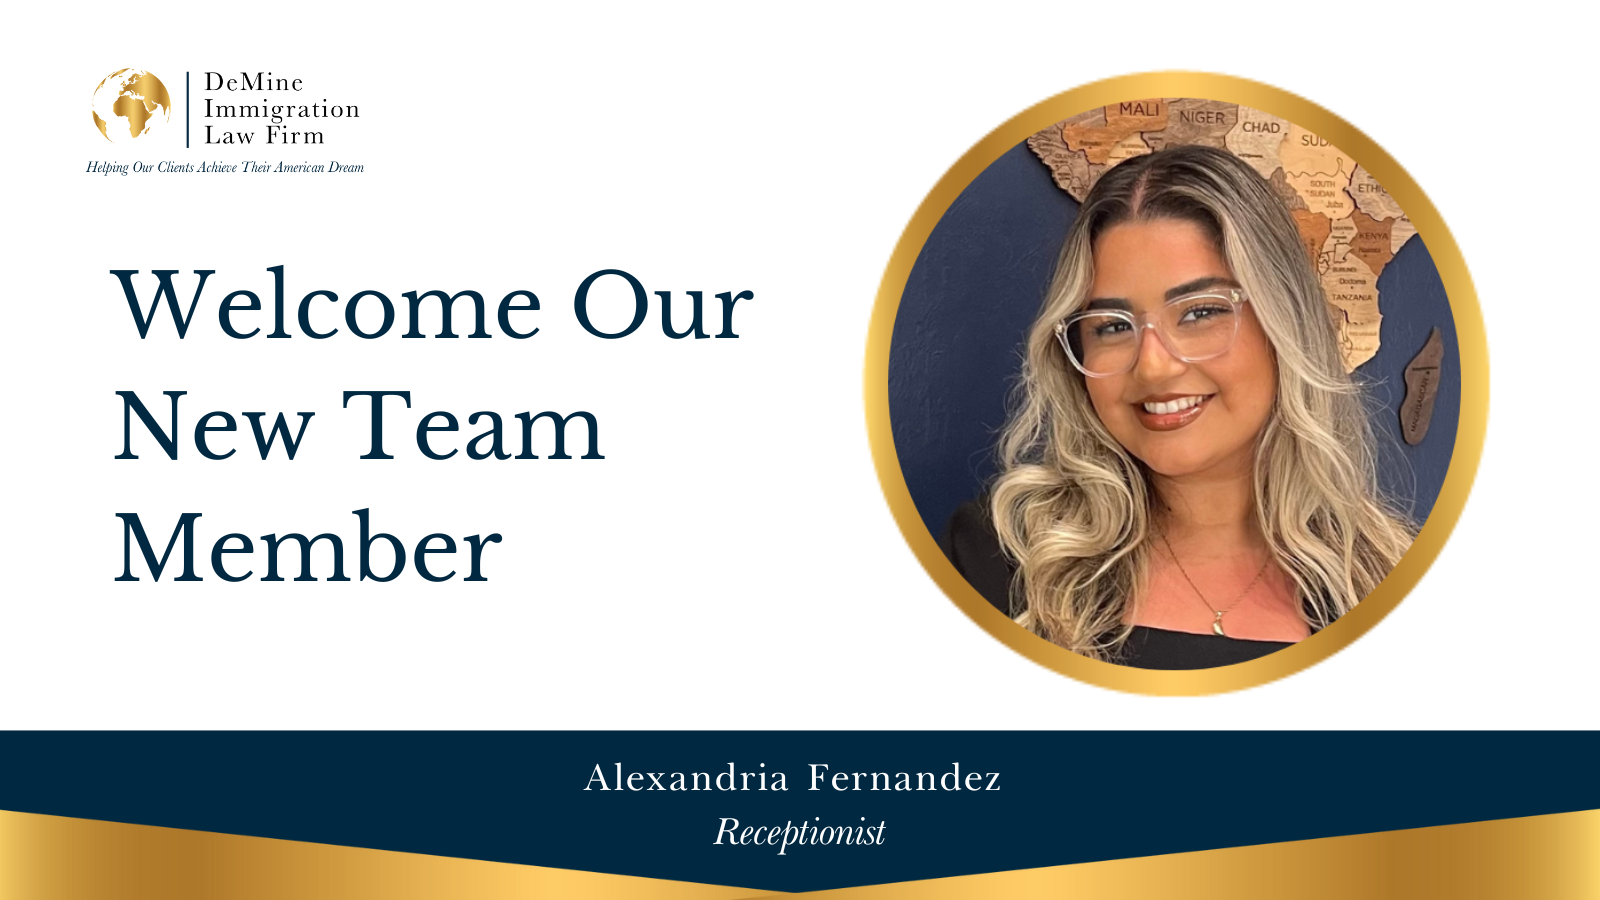 Introducing Alexandria Fernandez: A New Addition to the DeMine Immigration Law Firm Team